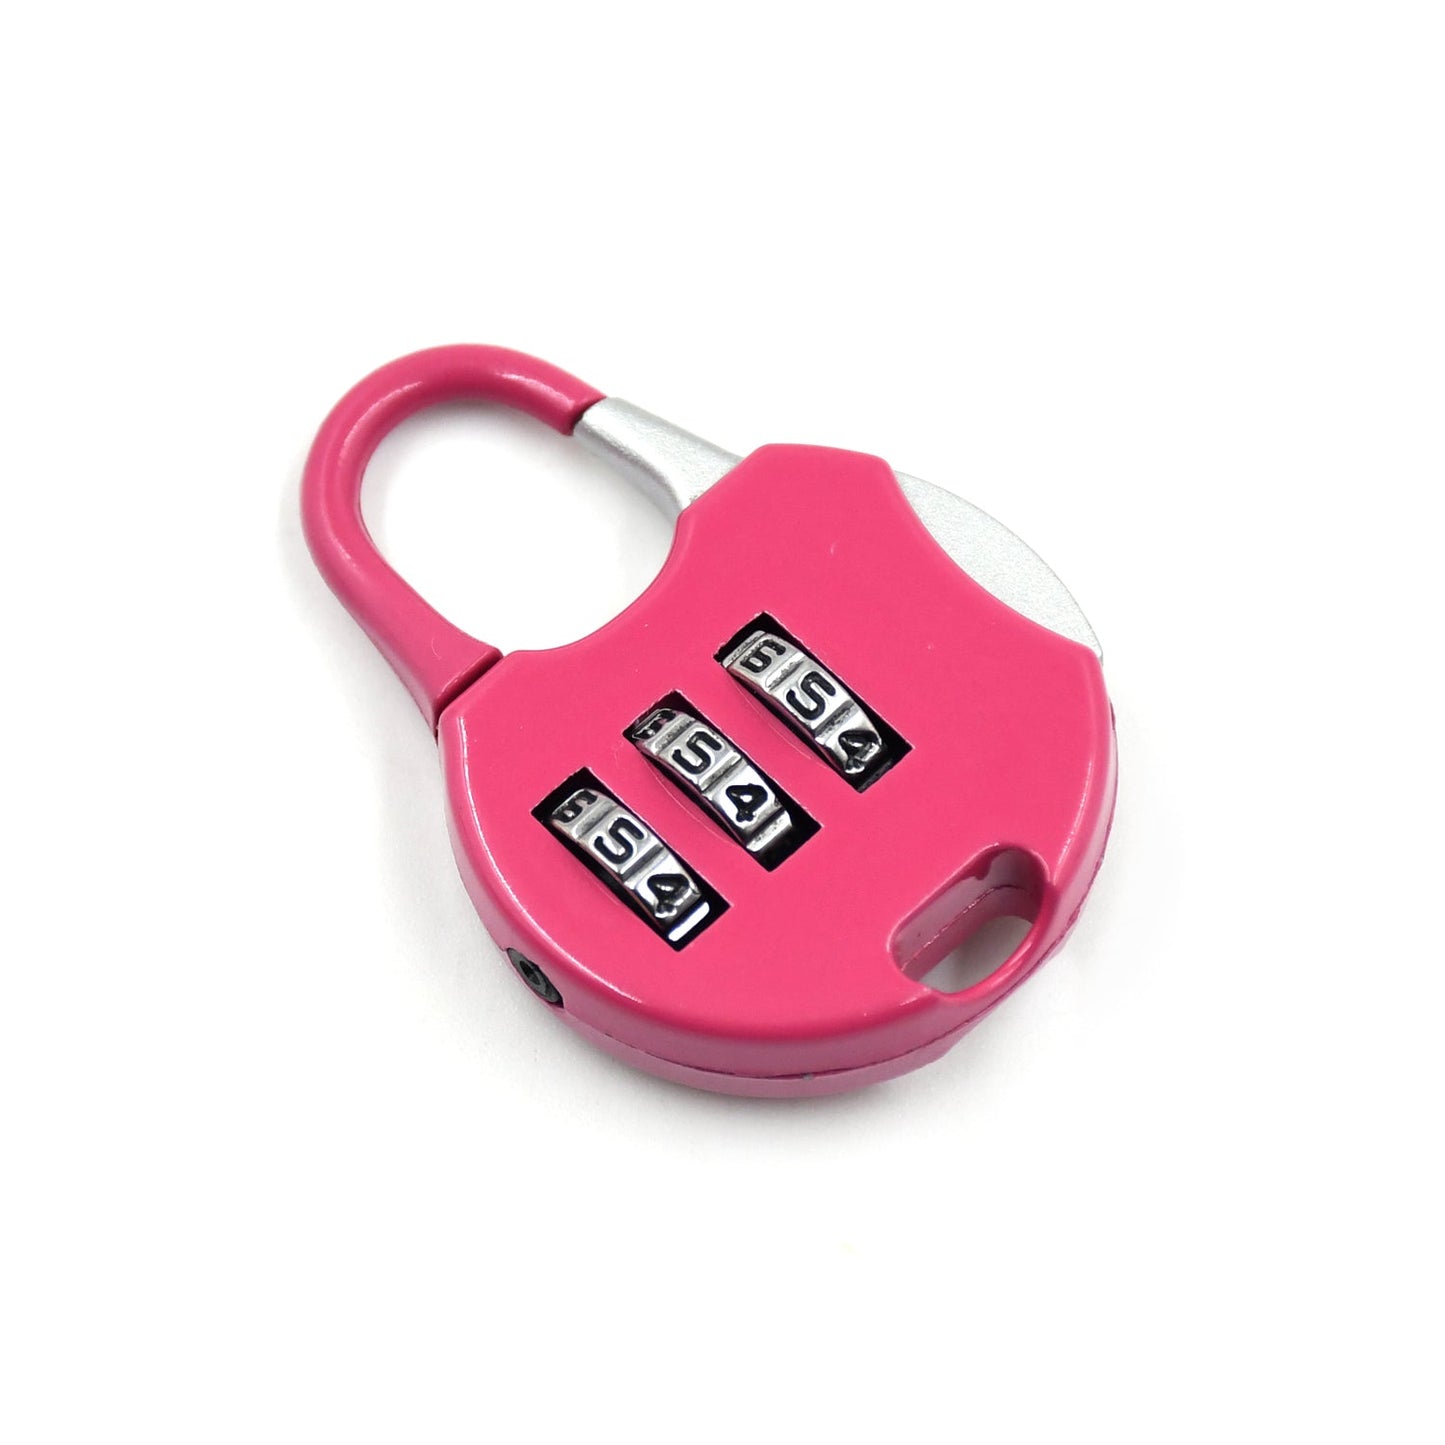 9003 3-Digit Travel Combination Lock of Zinc Alloy, Small Safe Combination Padlock Resettable Number Lock Small Colorful Code Locks for Lockers Suitcases Luggage With Safety Lanyard Spring Coil Wire Disc Brake Lock Reminder Cable